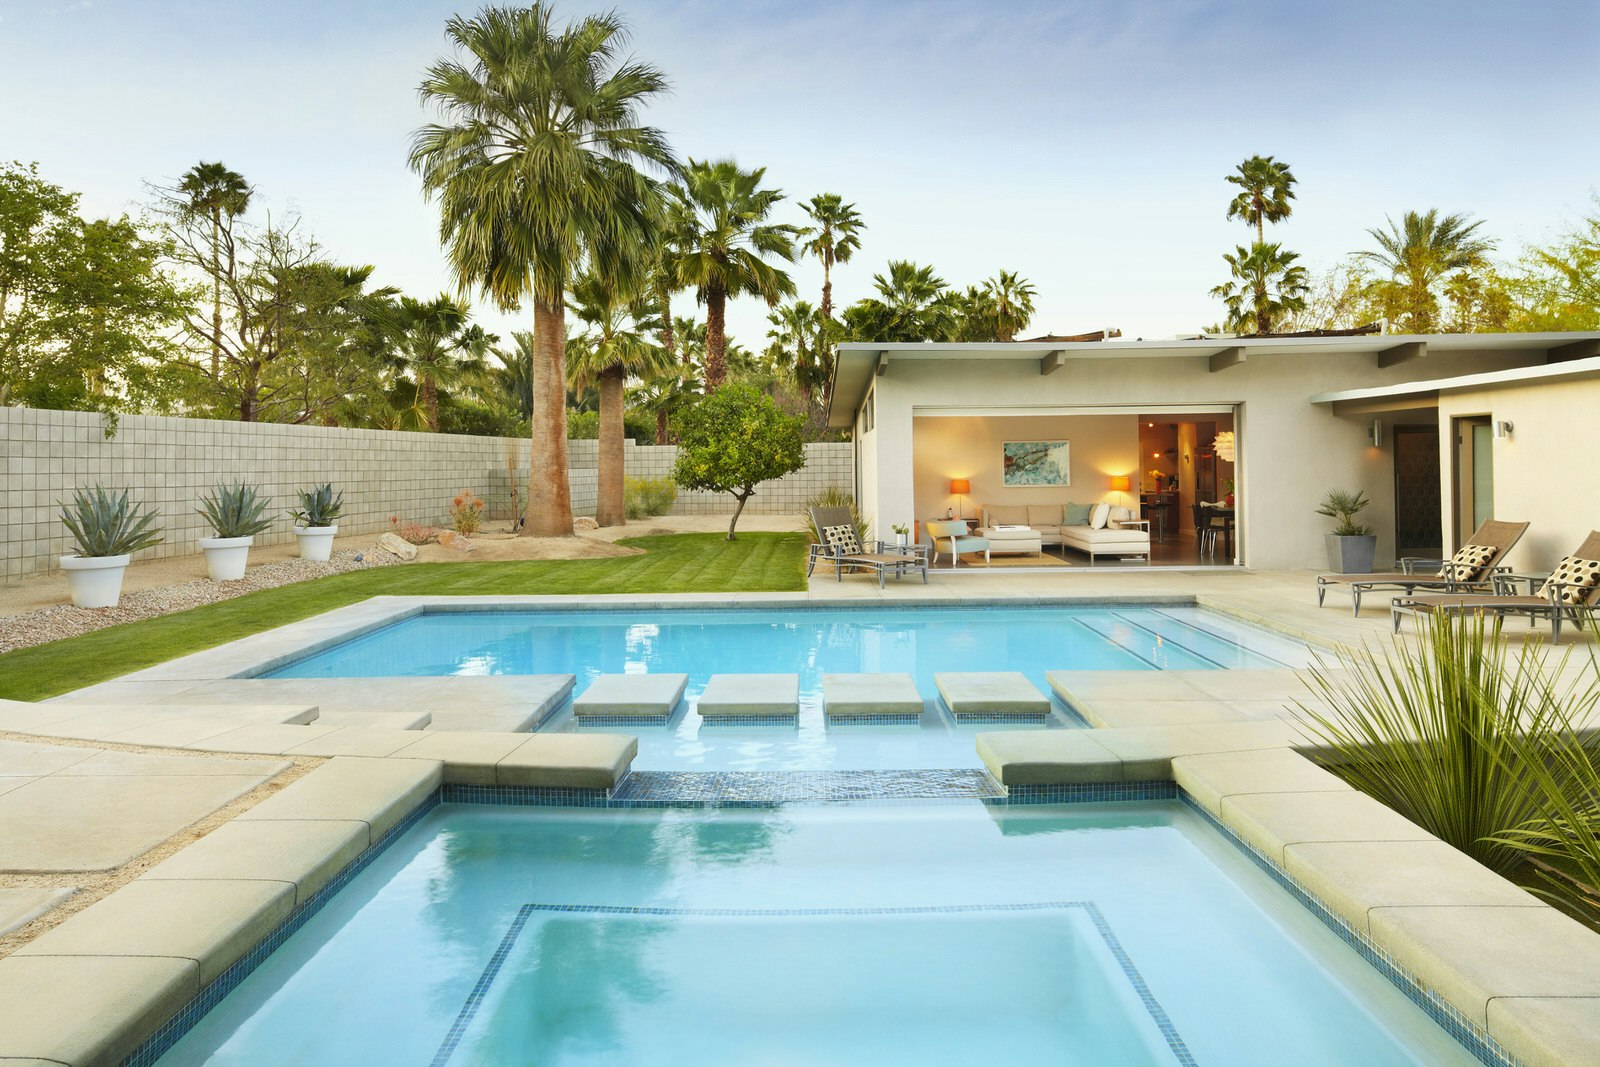 Palm Springs' sleek architecture and design is best experienced during Modernism Week © Trinette Reed / Getty Images